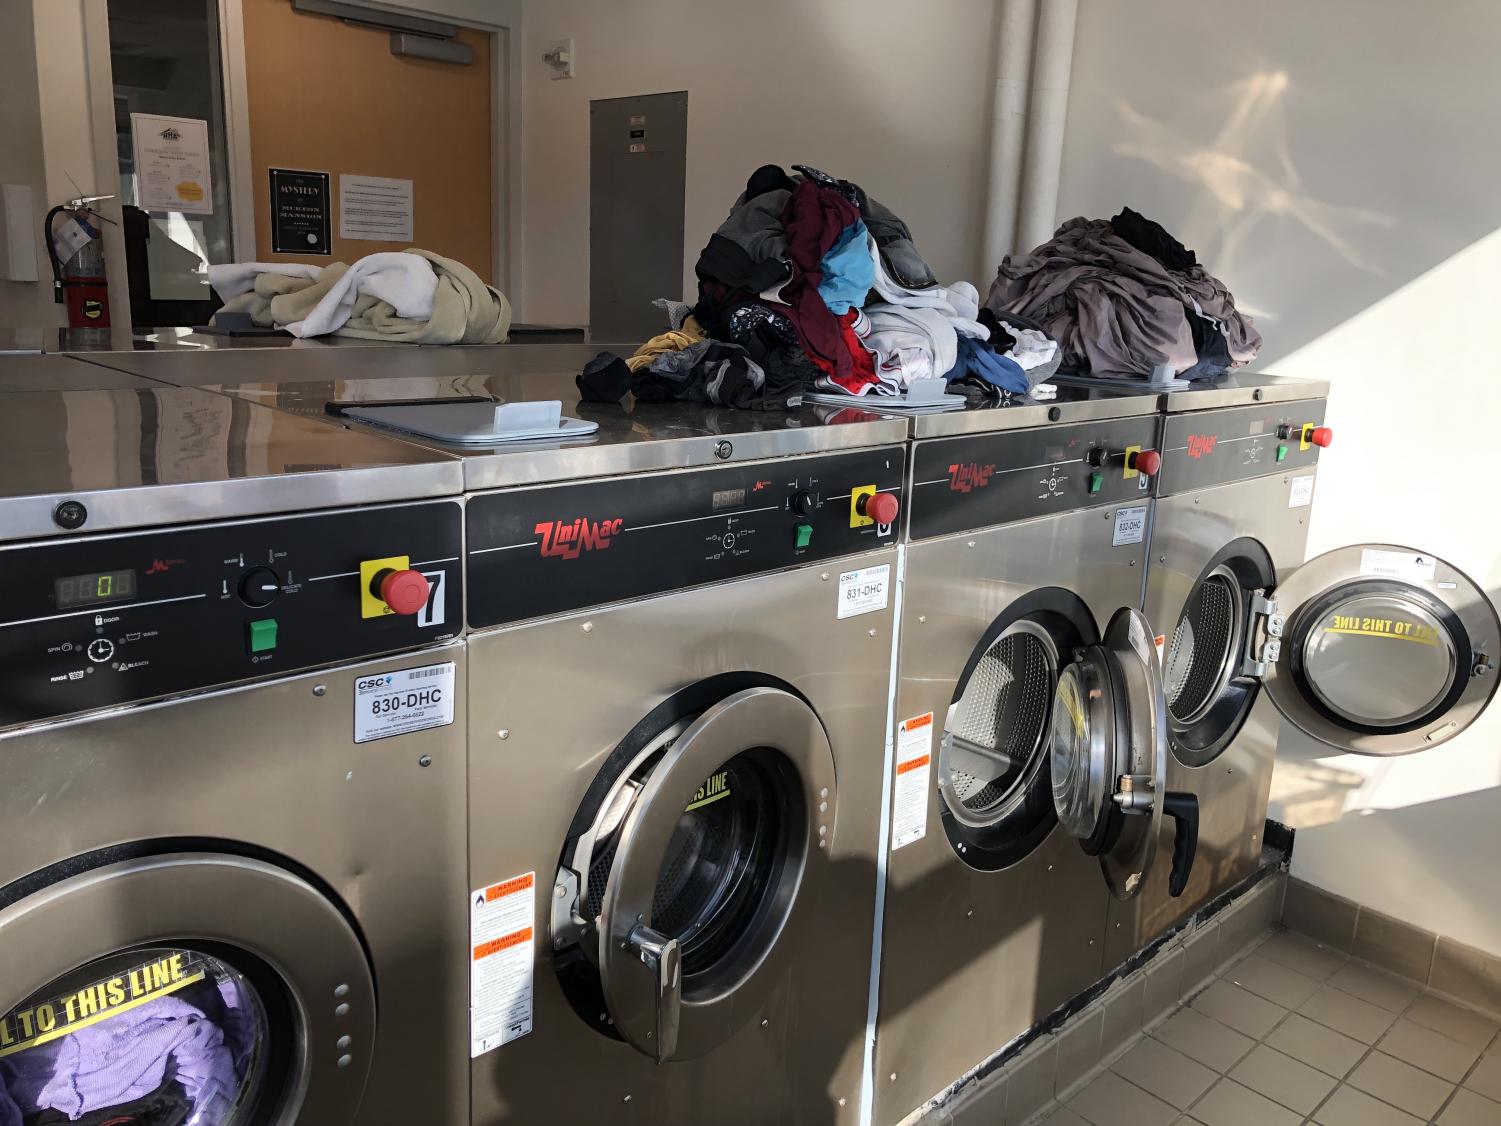 The McKeon Laundry Room Is a Lawless Land - The Observer